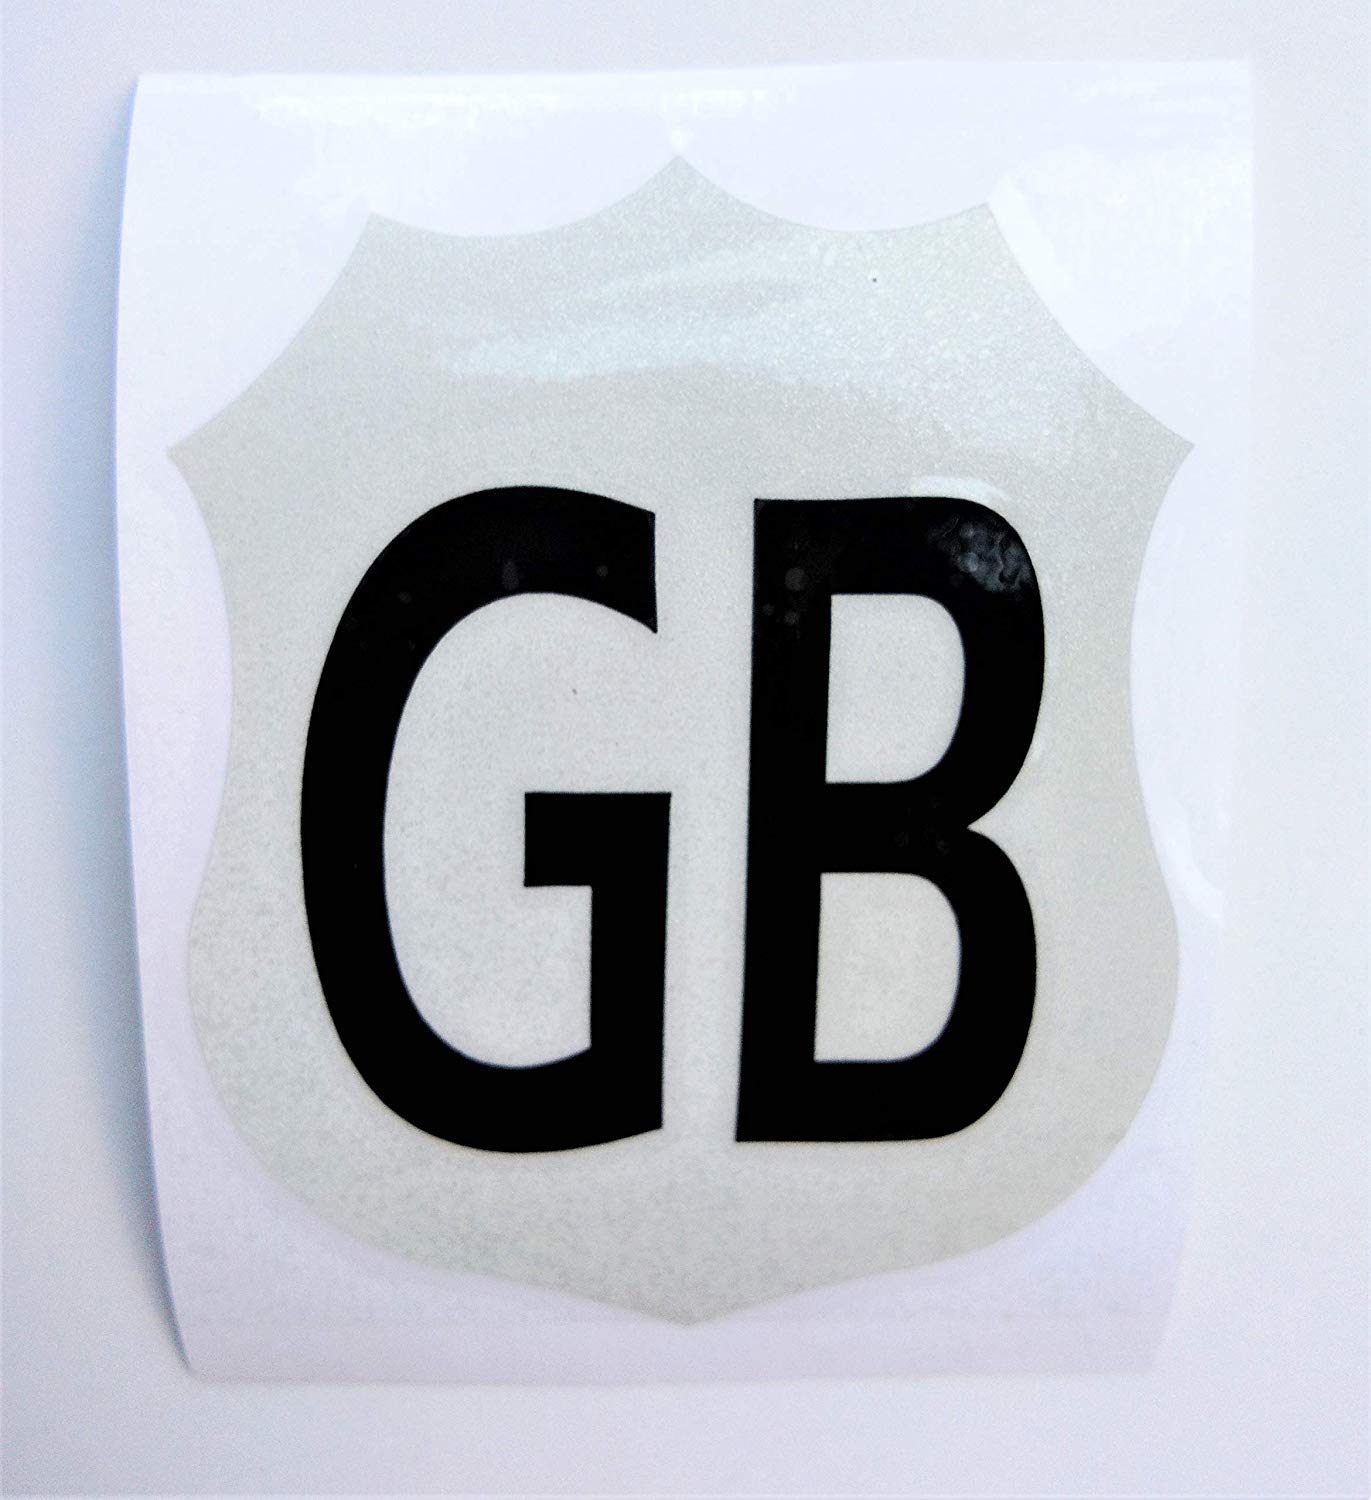 Moped Logo - Amazon.com : 3x3.75 inches Black GB Scooter Moped White Reflective